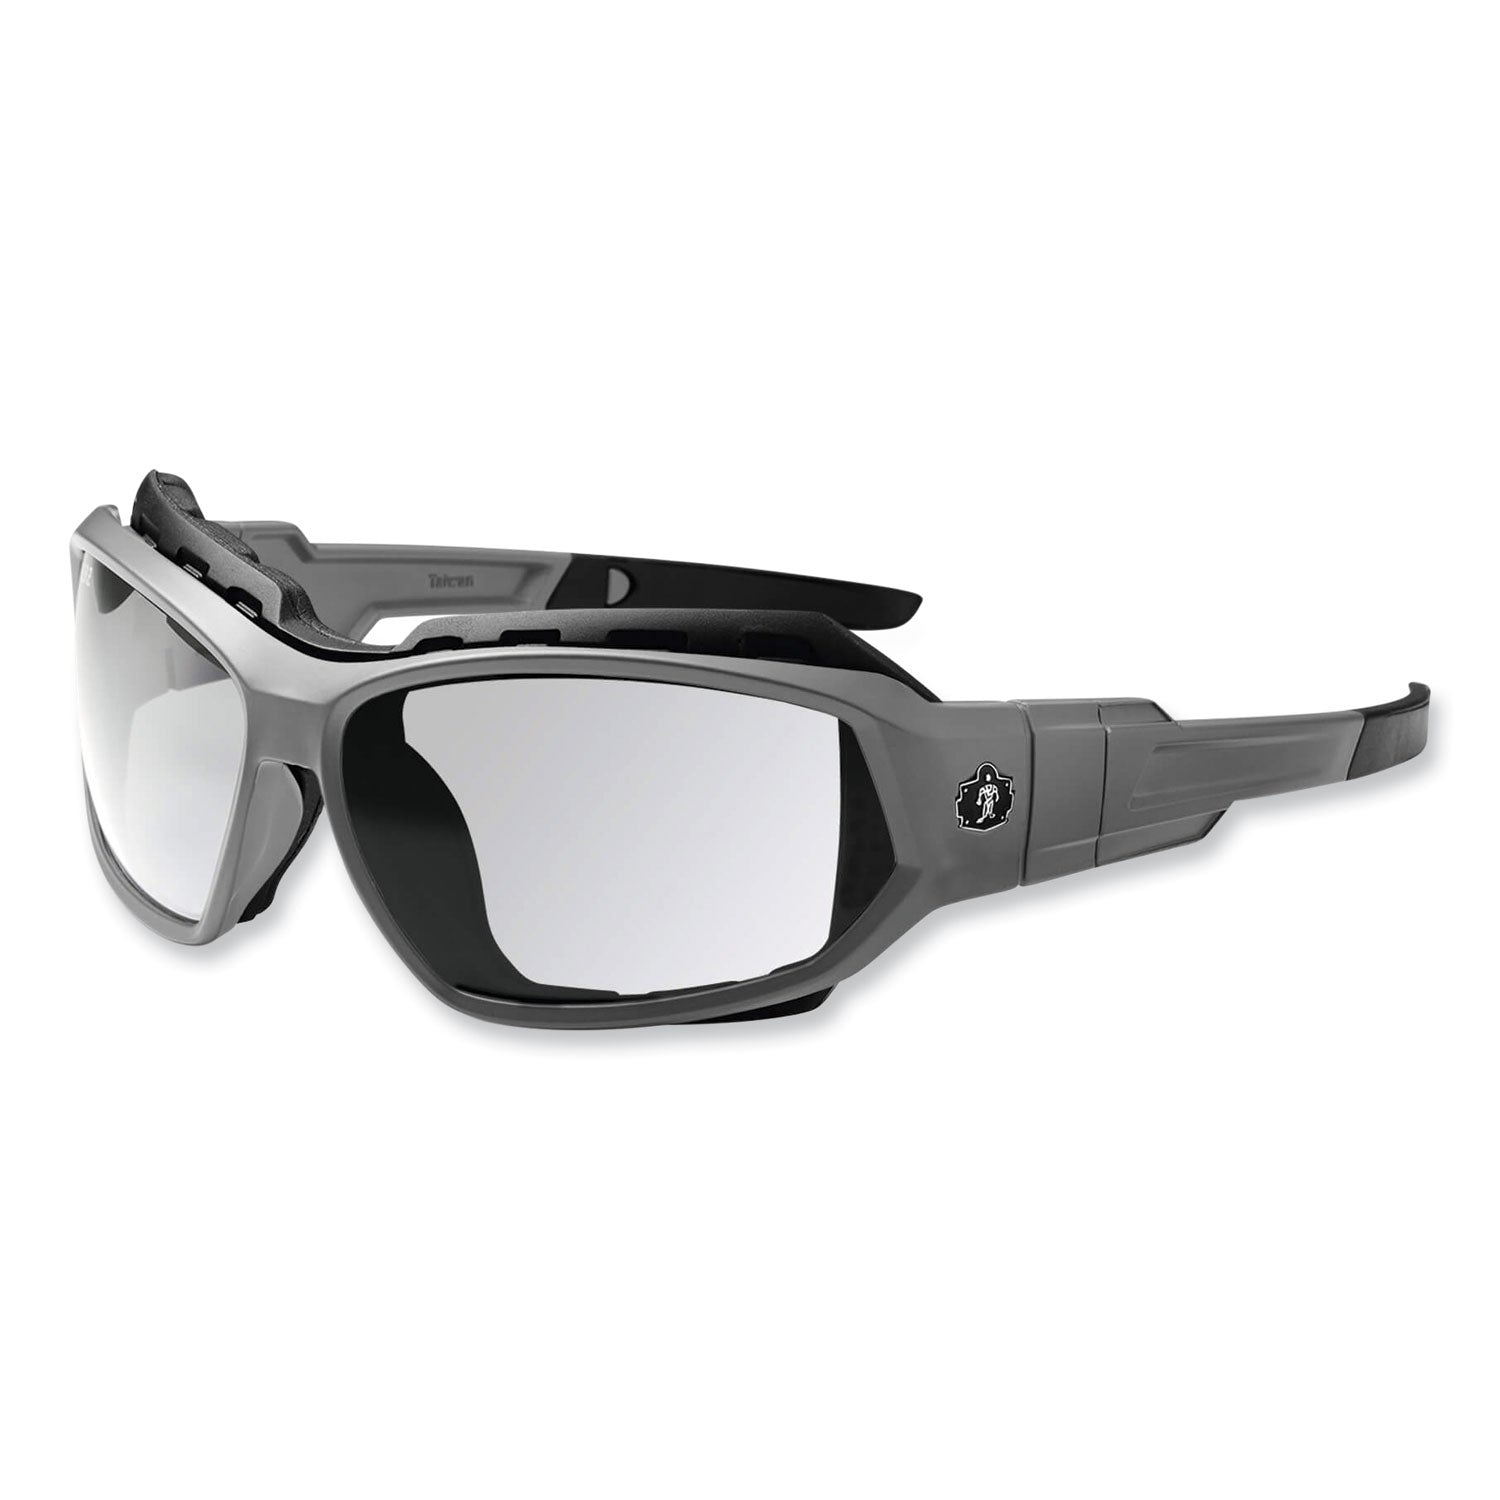 skullerz-loki-safety-glasses-goggles-matte-gray-nylon-impact-frame-anti-fog-clear-polycarb-lens-ships-in-1-3-business-days_ego56103 - 3